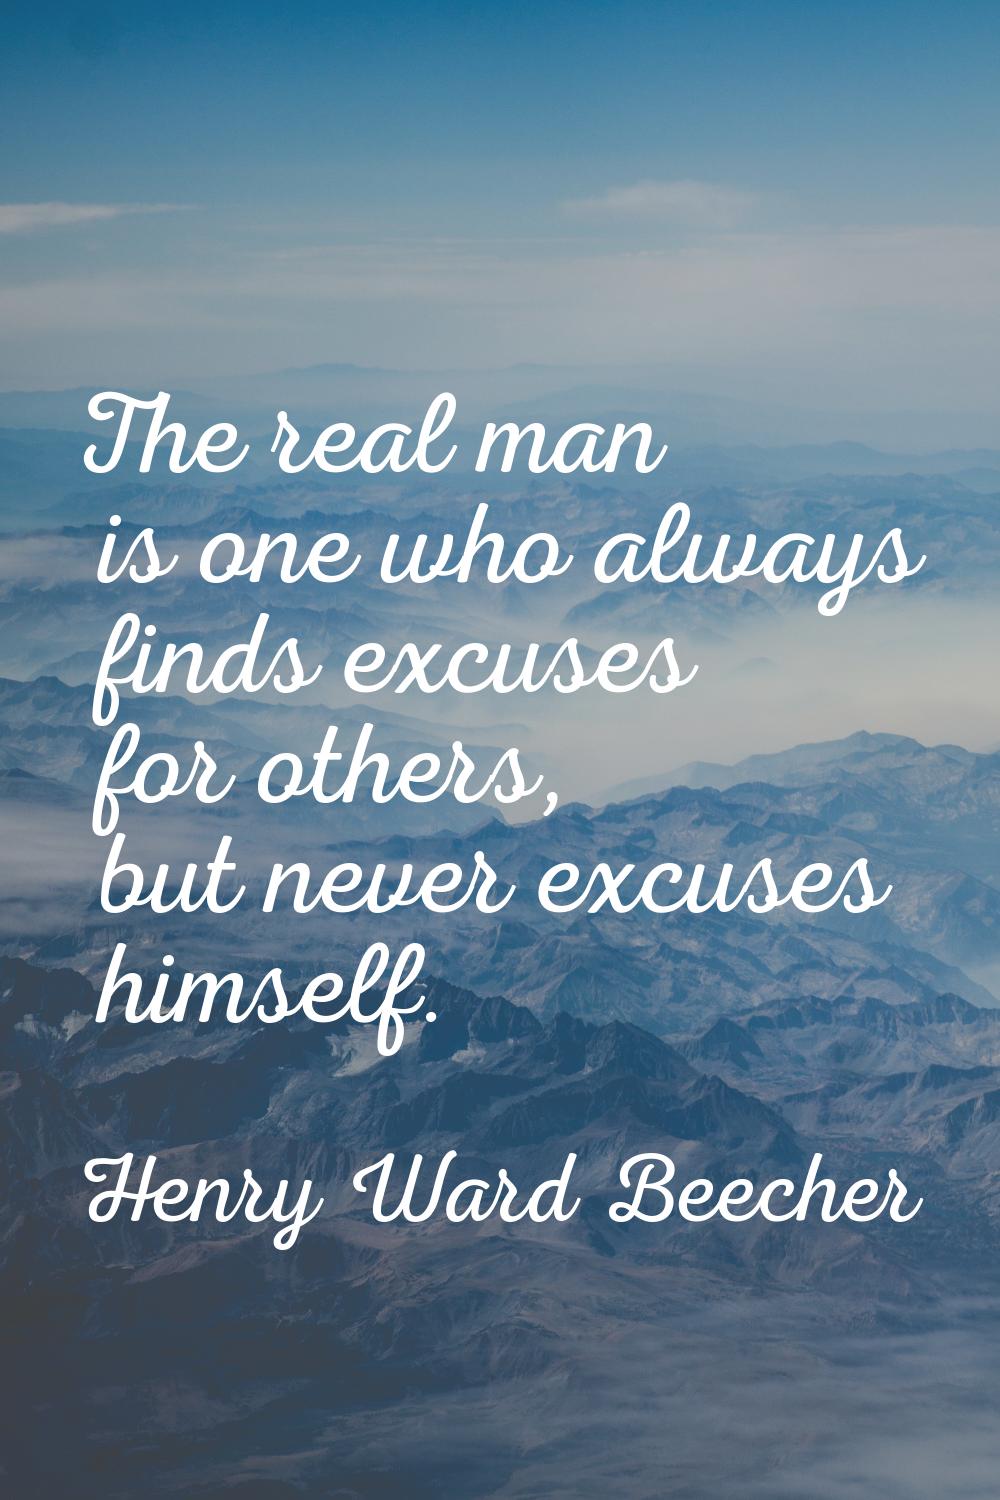 The real man is one who always finds excuses for others, but never excuses himself.